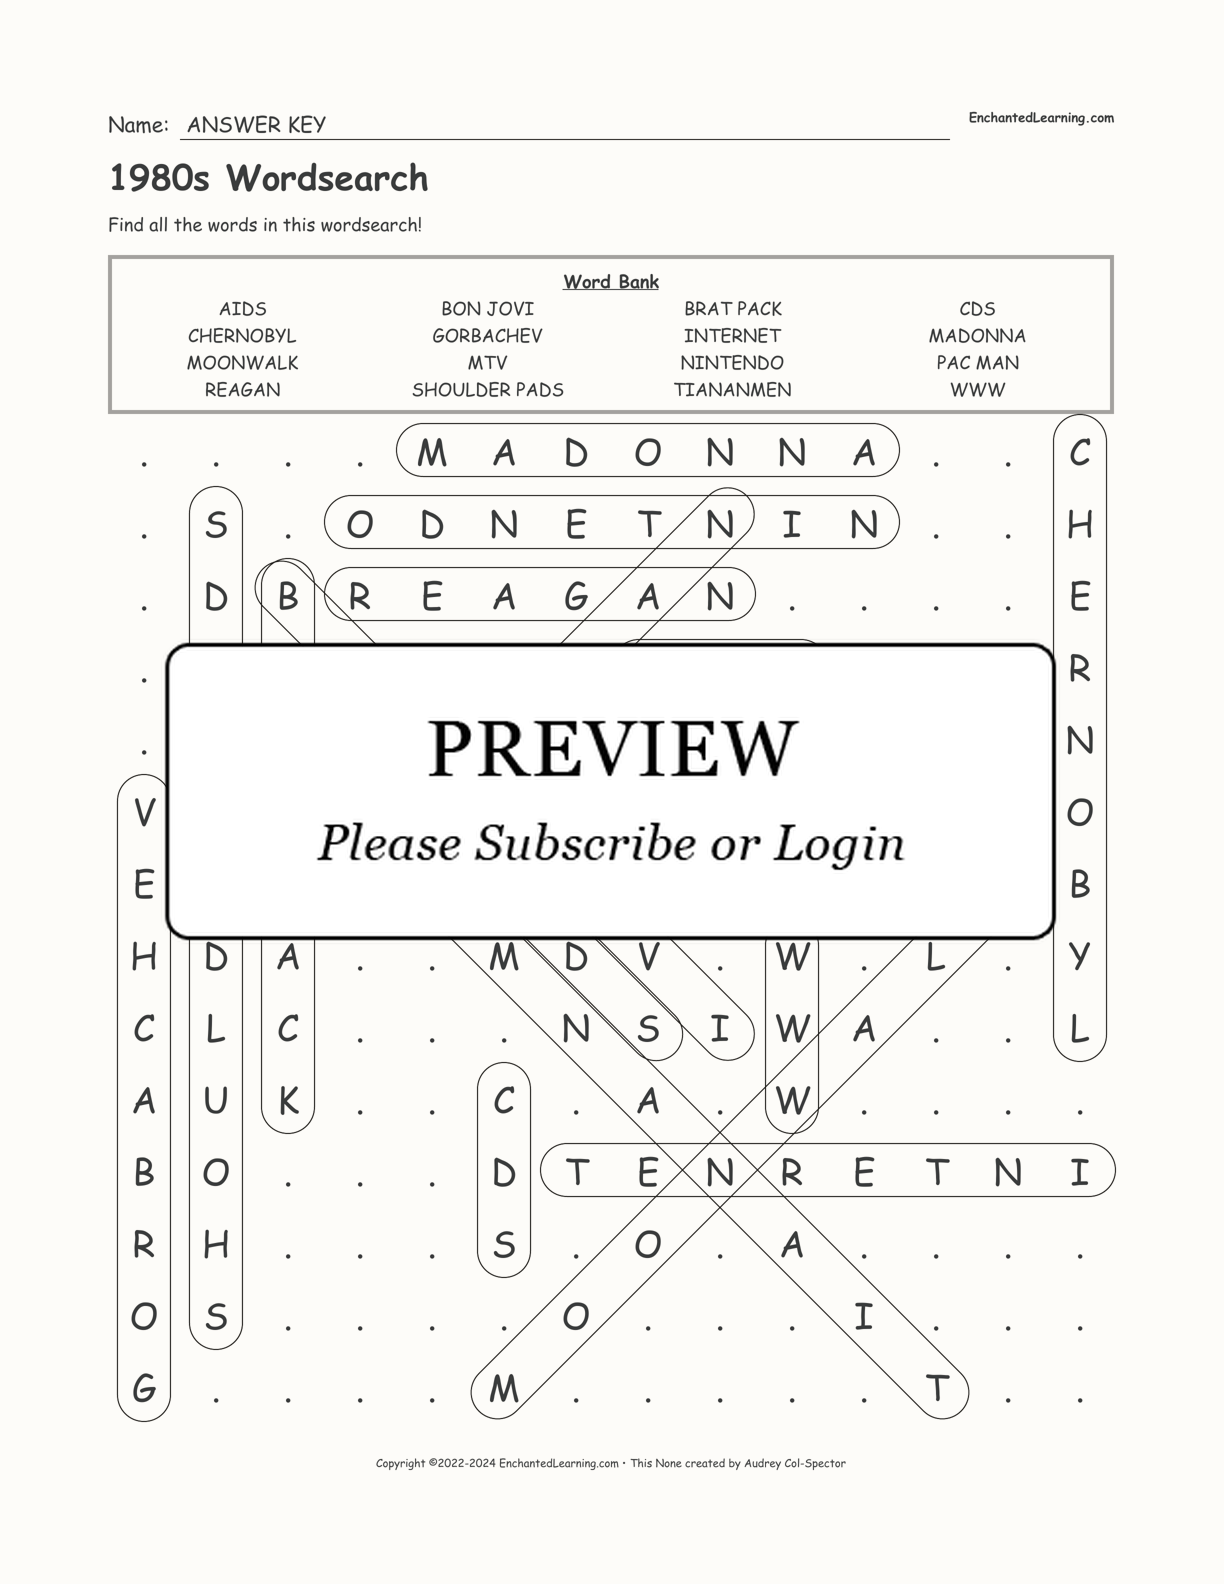 1980s Wordsearch interactive worksheet page 2